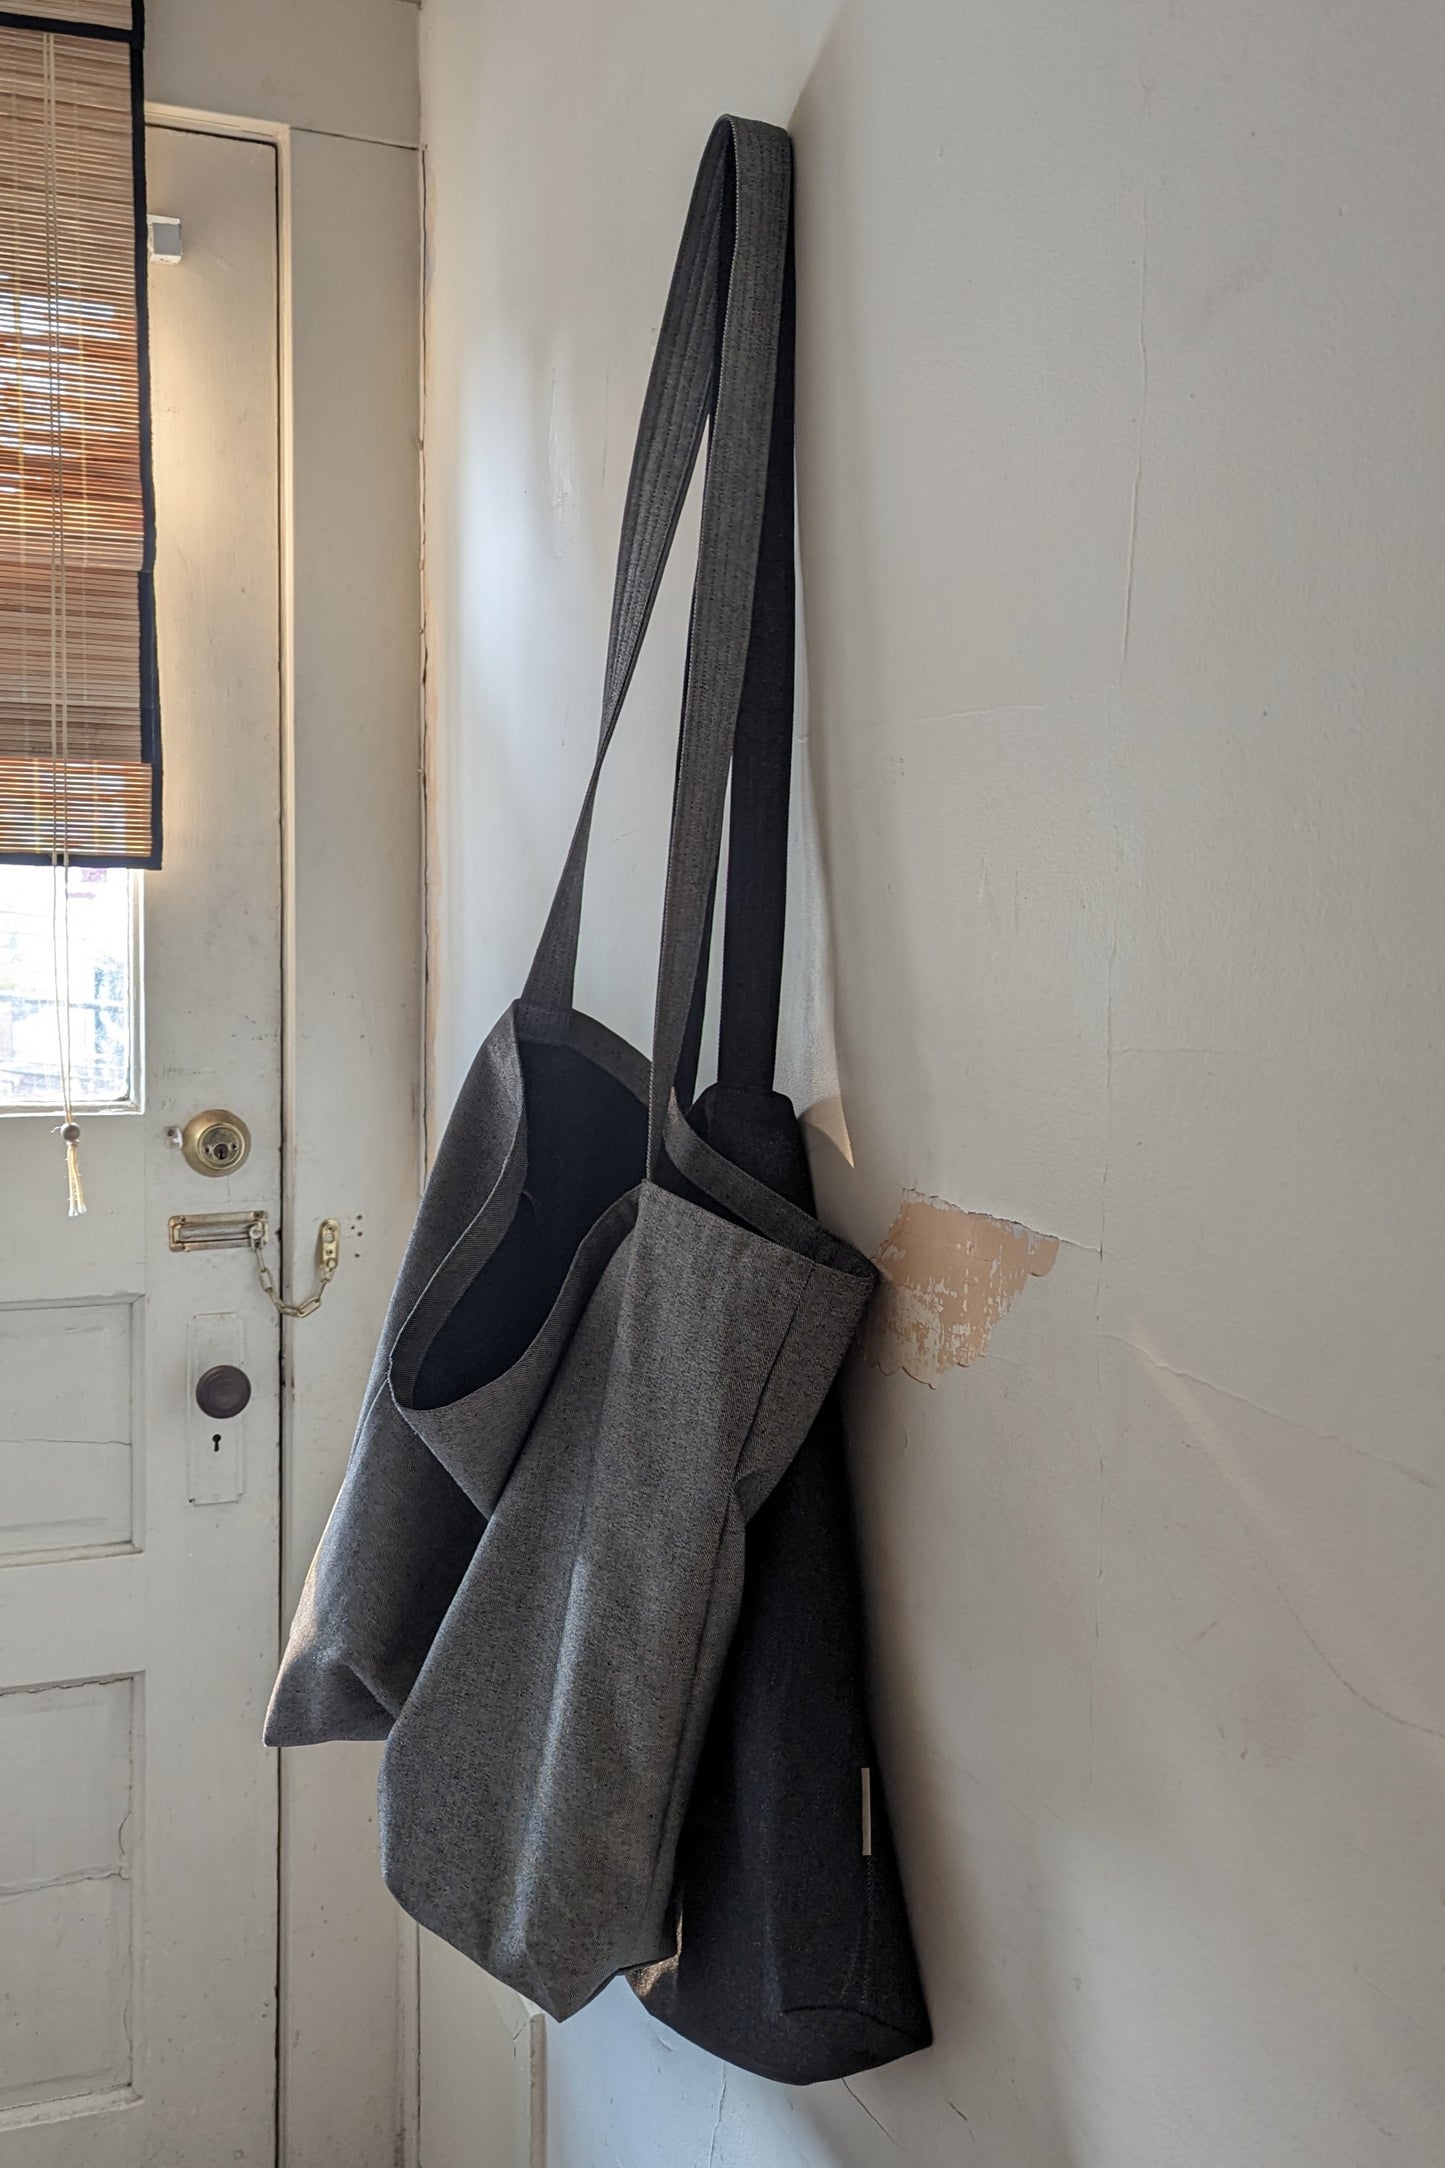 Japanese Raw Denim Haul-All Tote Bag with Extra-Long Strap (Charcoal) by Connally Goods